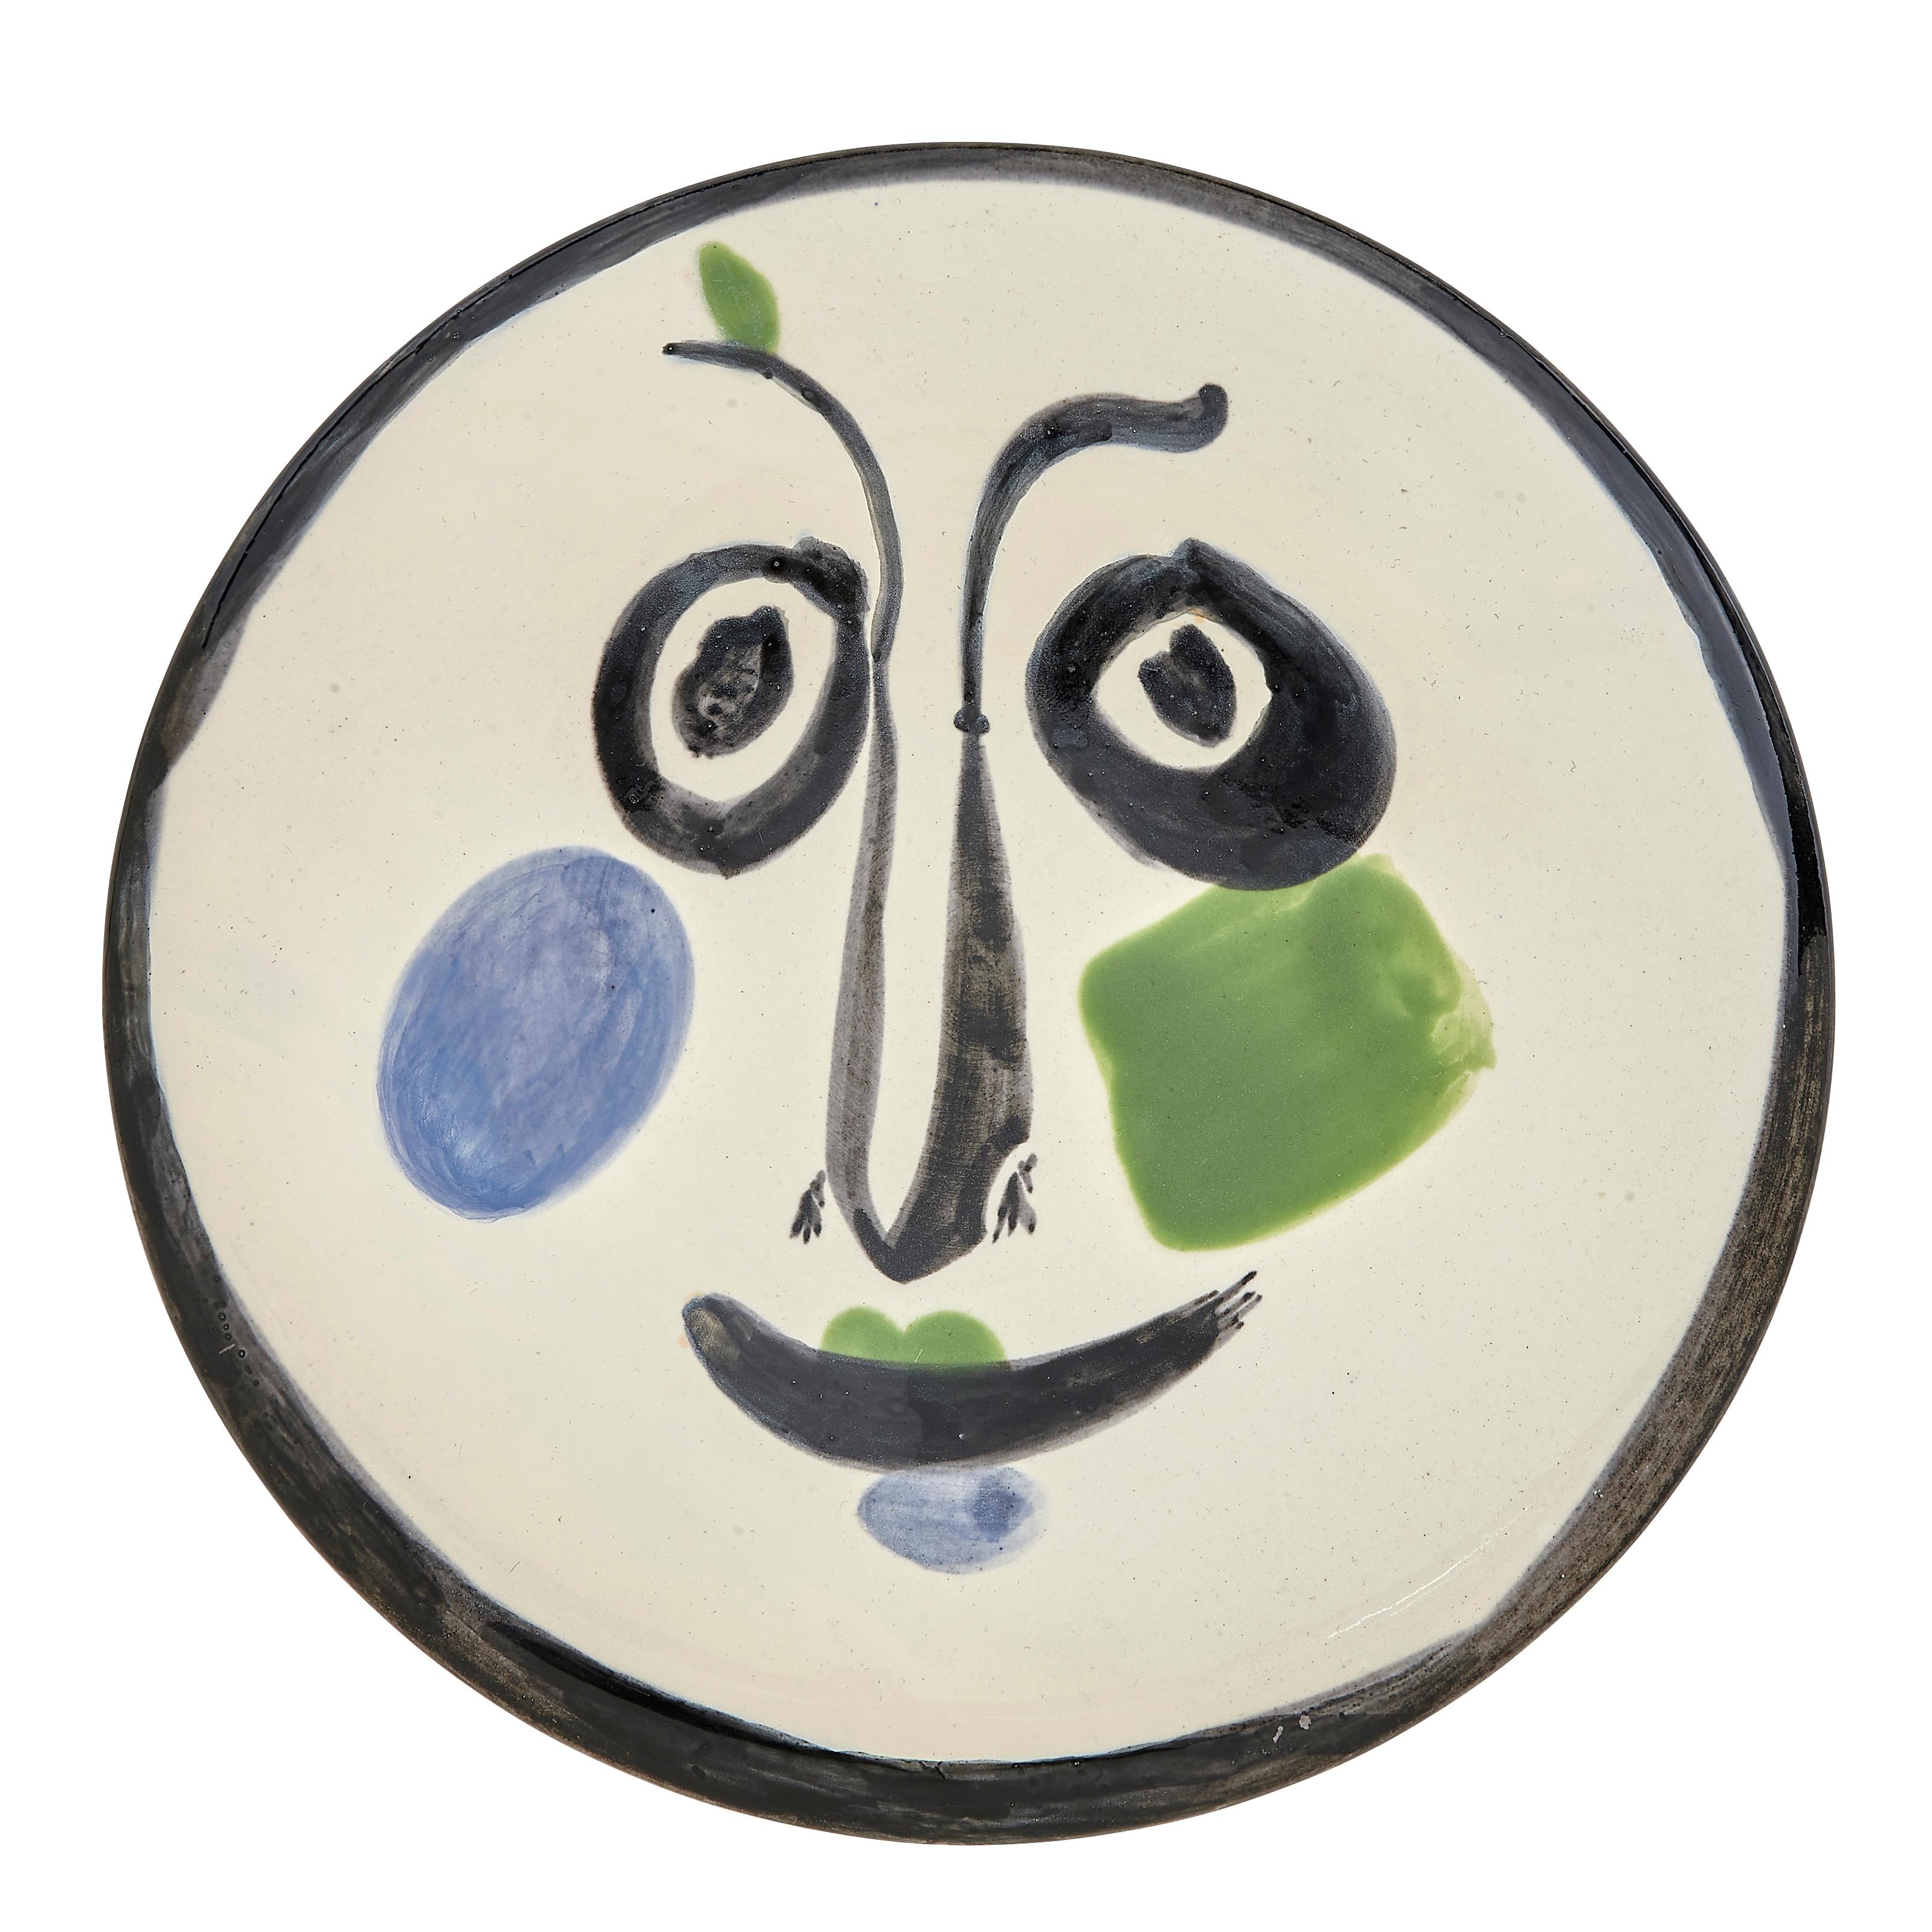 PABLO PICASSO (1881-1973) 
Visage No. 197 (A. R. 494) 

Terre de faïence plate, 1963, numbered 365/500, titled, inscribed 'Edition Picasso' and 'Madoura', glazed and painted